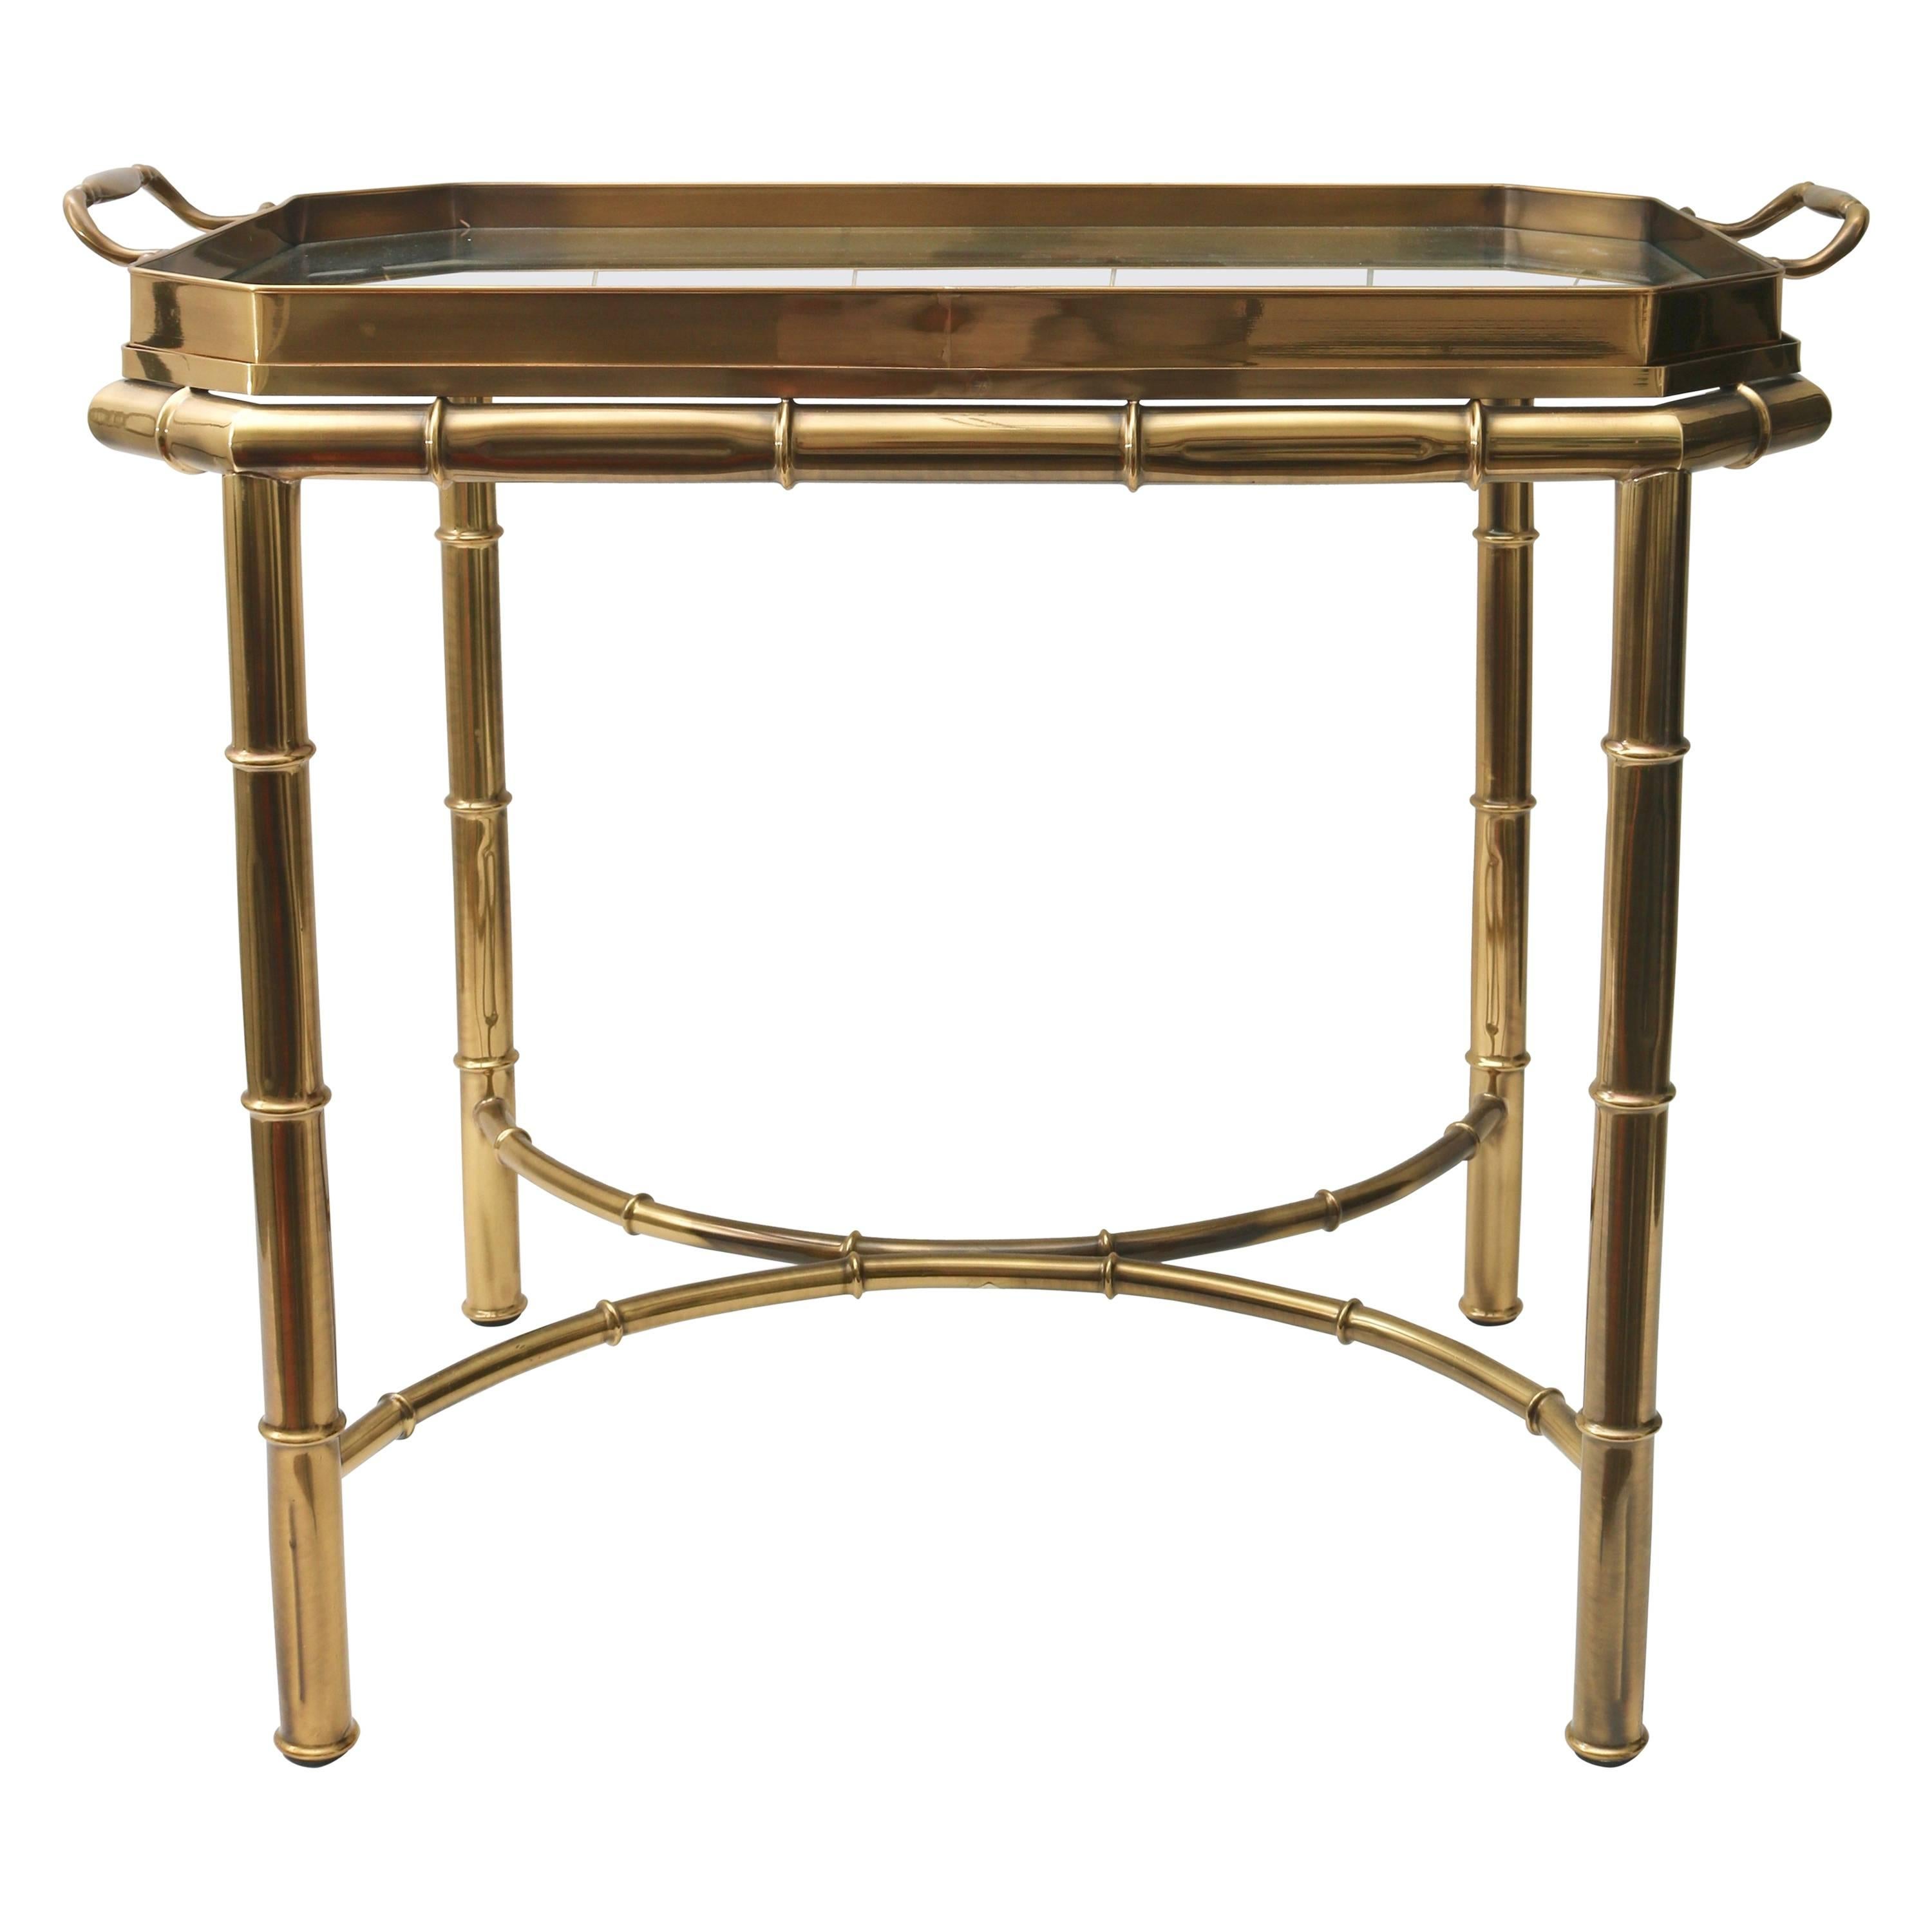 Faux Bamboo Tray Table in Antique Brass